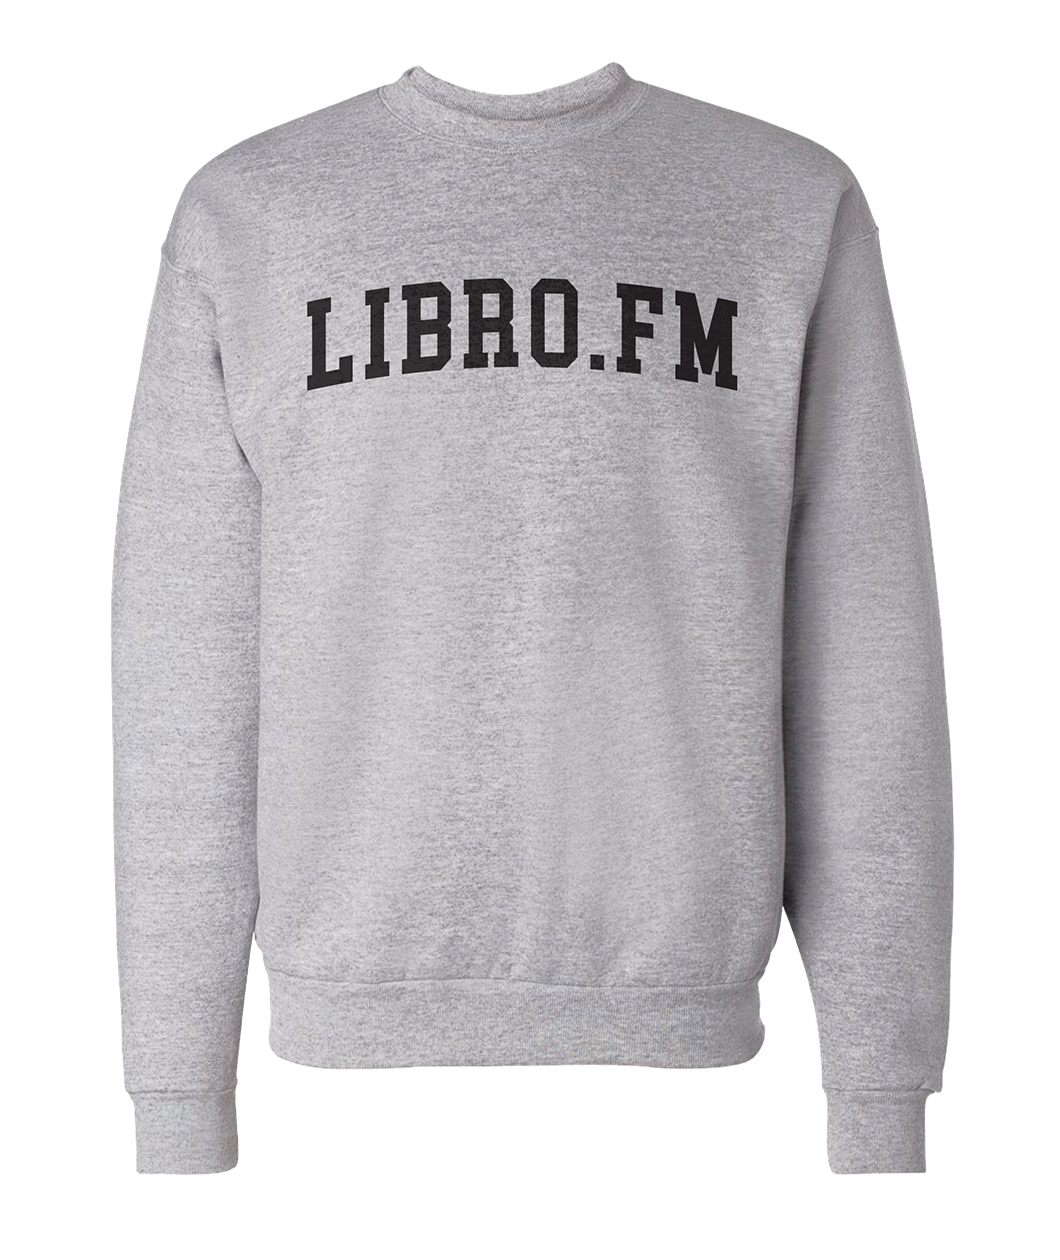 A light gray crewneck sweatshirt with "LIBRO.FM" in arched black serif font across the chest - from Libro.fm